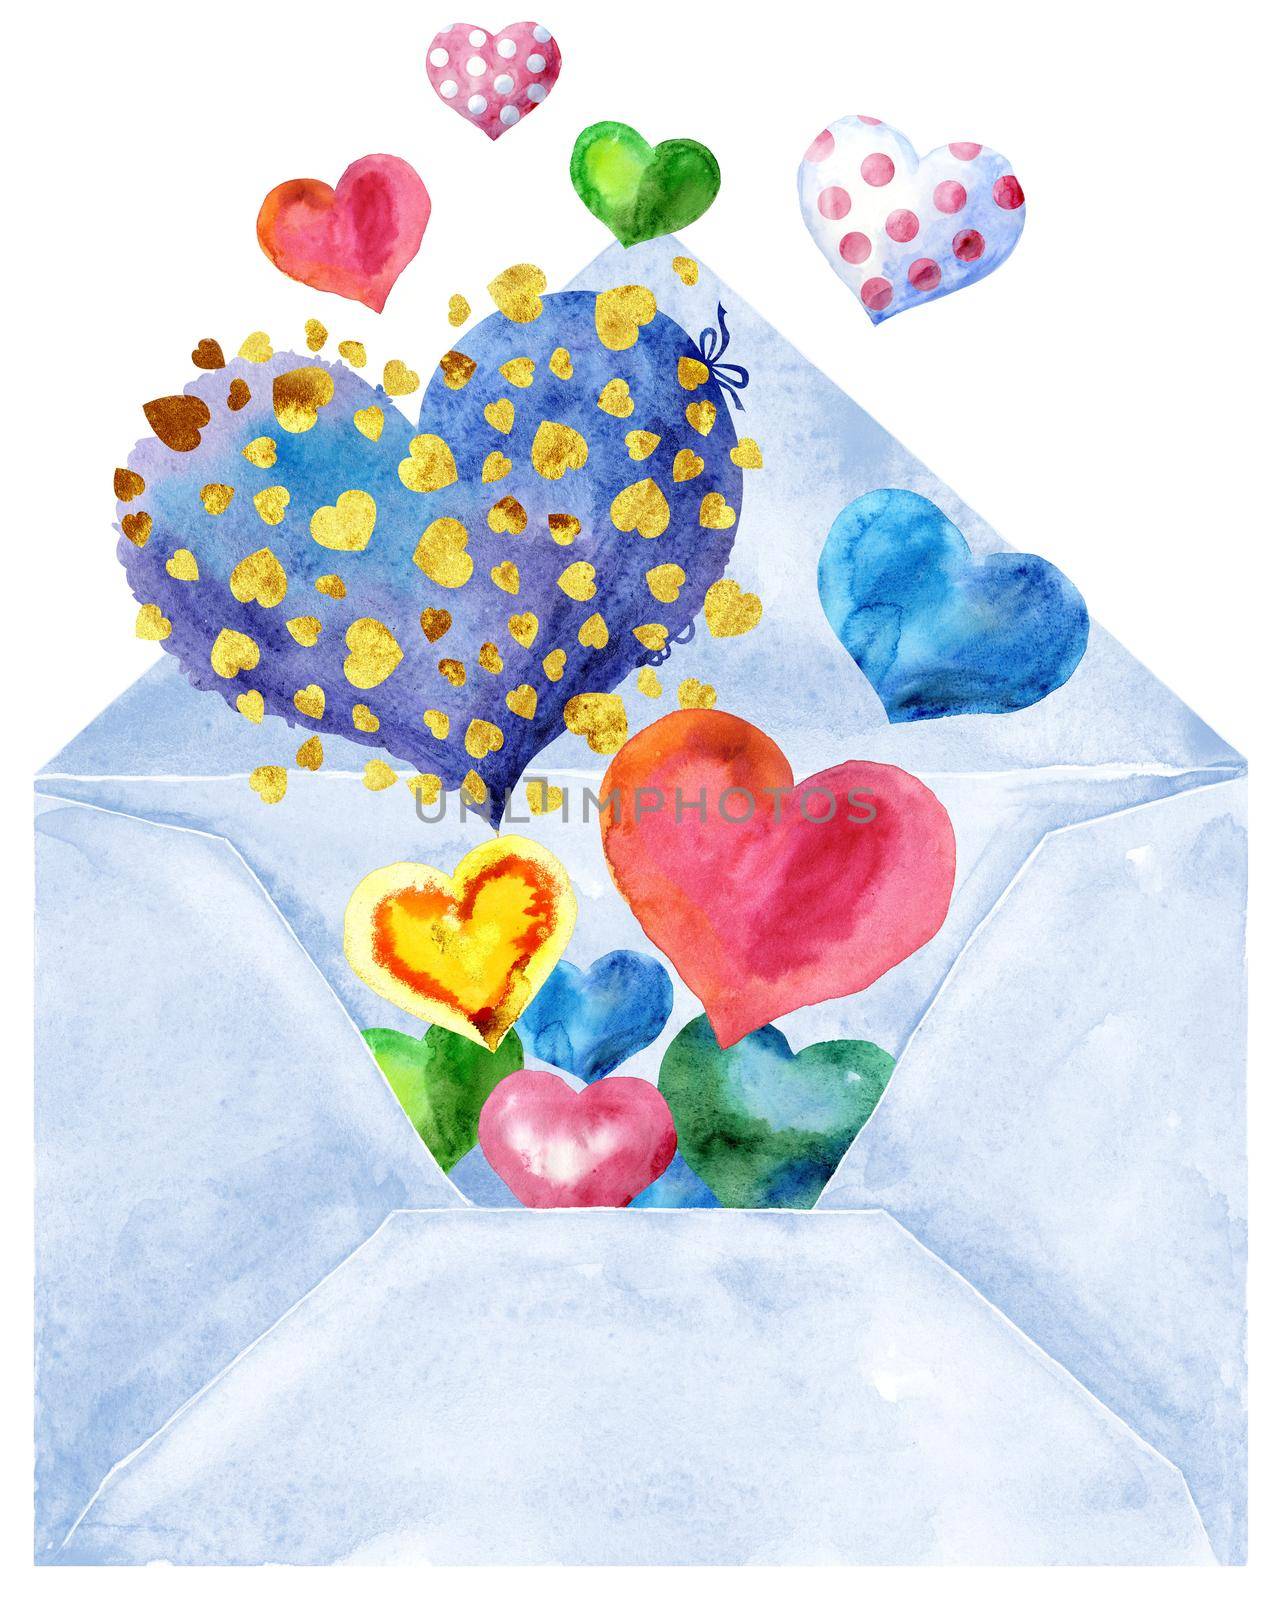 Envelope with hearts, Love Letter Hearts Romance. watercolor illustration isolated on white background. by NataOmsk